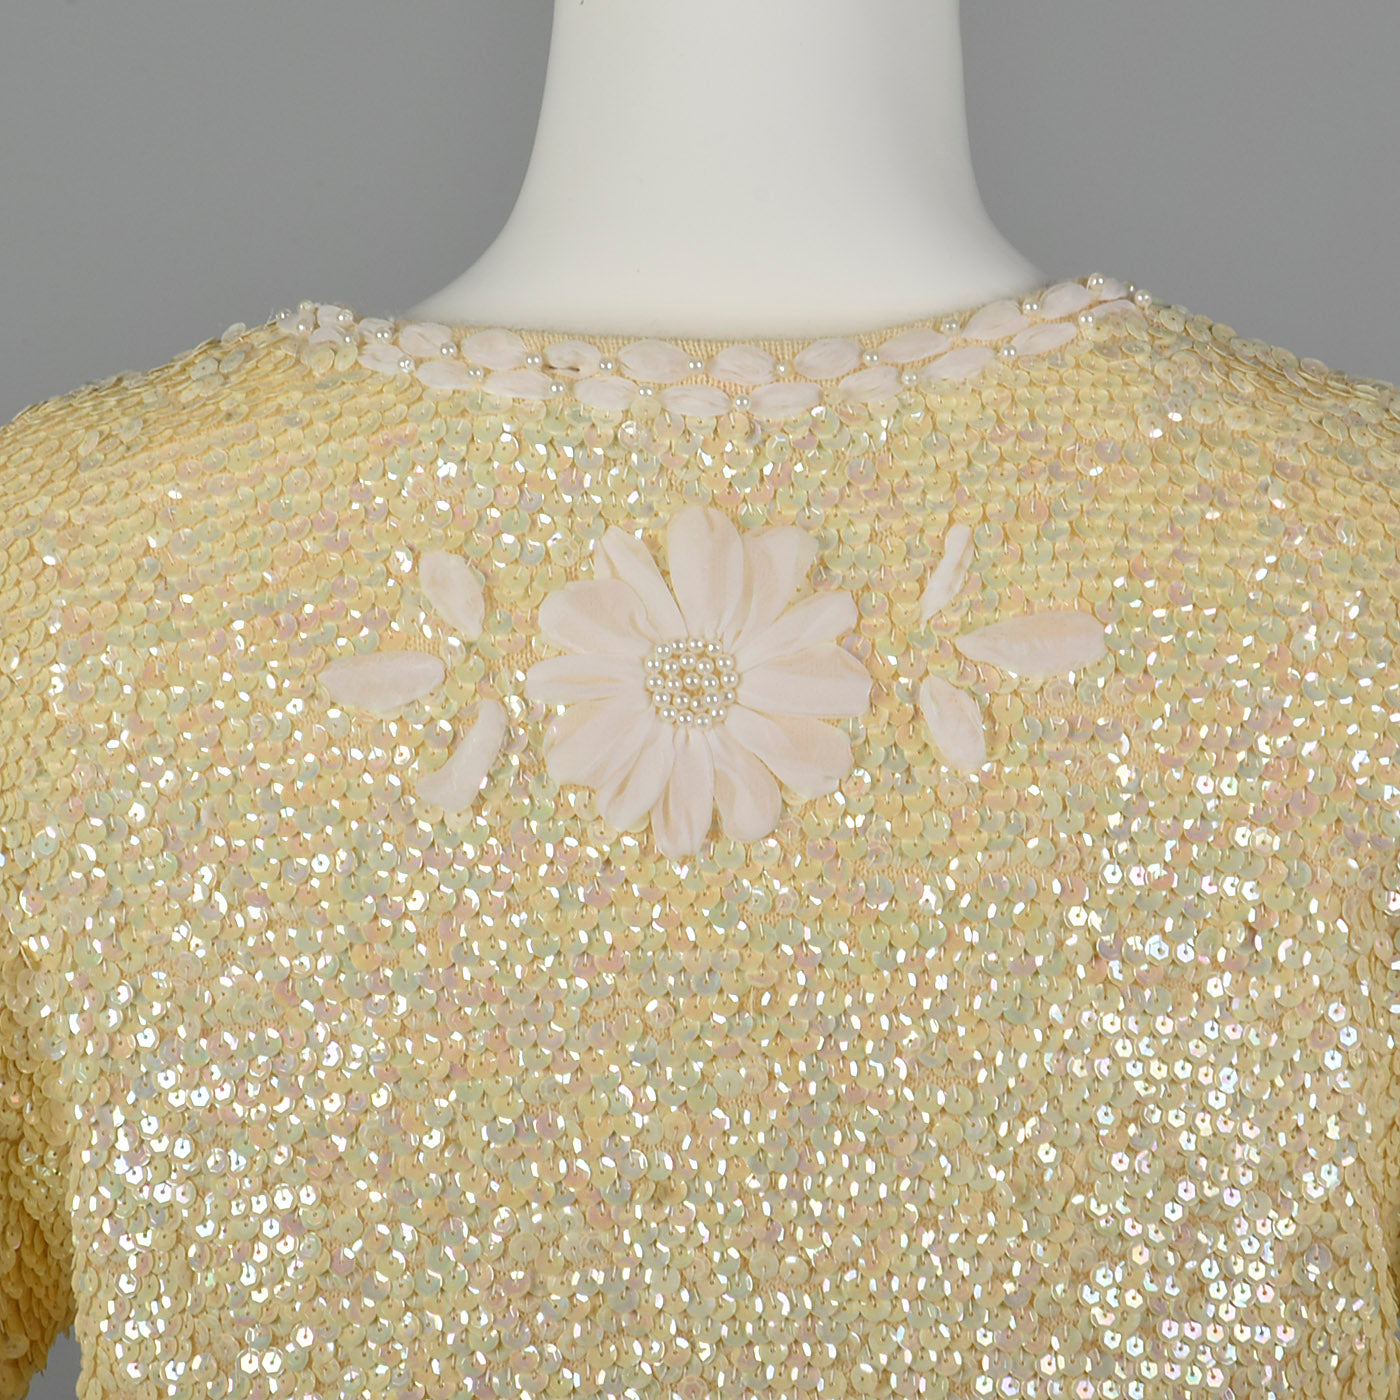 1960s Cardigan with Sequins and Woven Ribbon Design